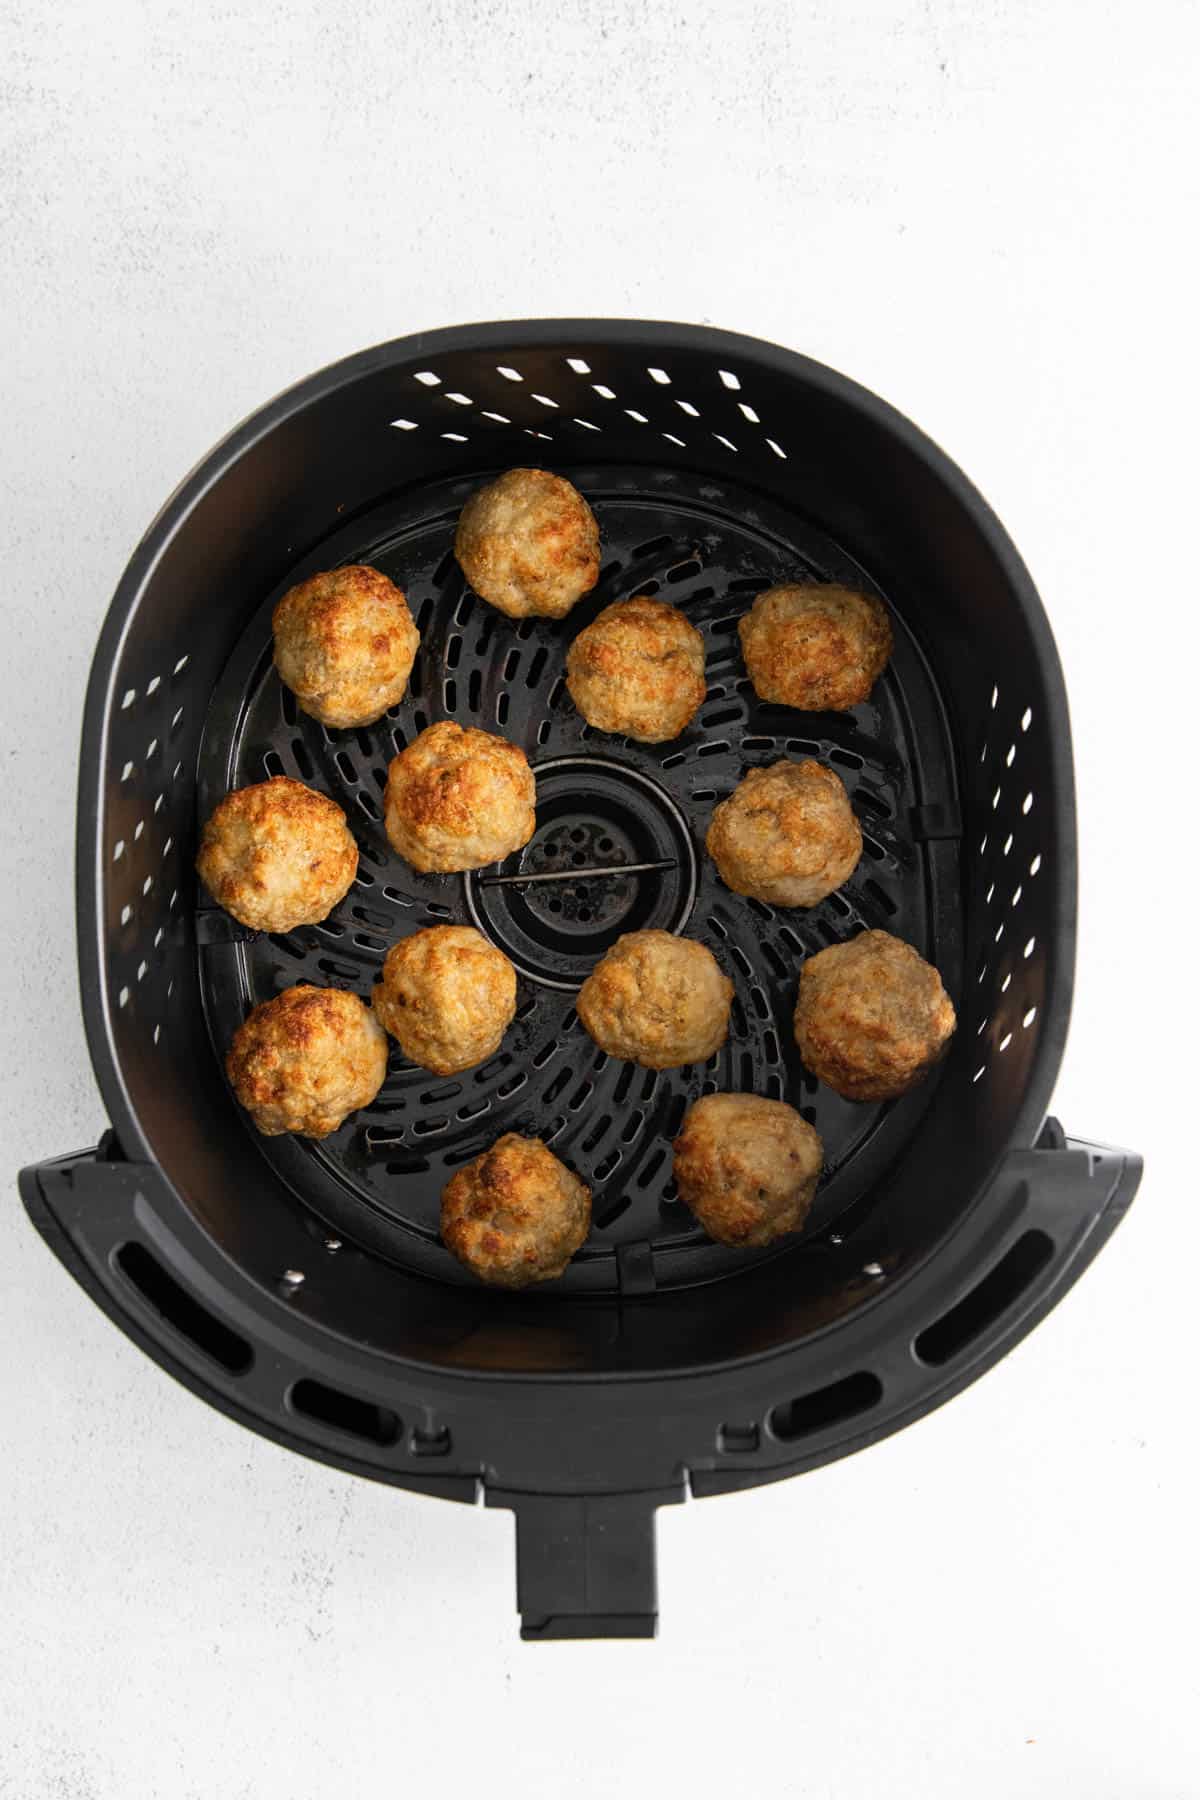 Partially cooked chicken meatballs in an air fryer basket.